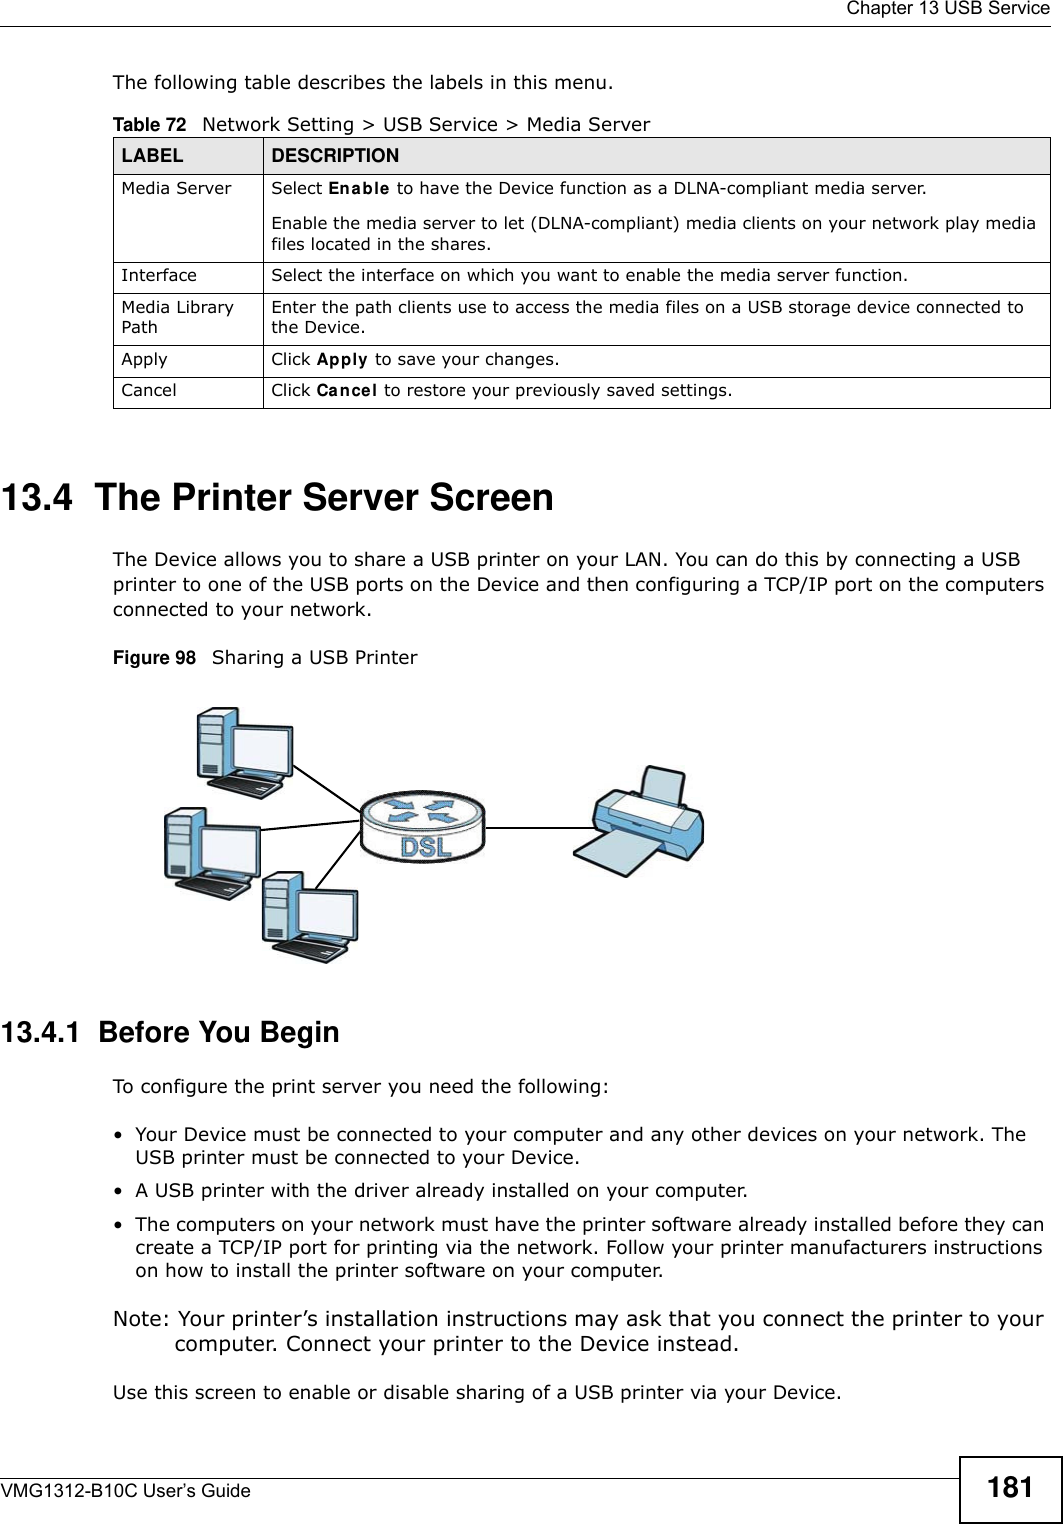  Chapter 13 USB ServiceVMG1312-B10C User’s Guide 181The following table describes the labels in this menu.13.4  The Printer Server ScreenThe Device allows you to share a USB printer on your LAN. You can do this by connecting a USB printer to one of the USB ports on the Device and then configuring a TCP/IP port on the computers connected to your network. Figure 98   Sharing a USB Printer13.4.1  Before You BeginTo configure the print server you need the following:• Your Device must be connected to your computer and any other devices on your network. The USB printer must be connected to your Device.• A USB printer with the driver already installed on your computer.• The computers on your network must have the printer software already installed before they can create a TCP/IP port for printing via the network. Follow your printer manufacturers instructions on how to install the printer software on your computer. Note: Your printer’s installation instructions may ask that you connect the printer to your computer. Connect your printer to the Device instead.Use this screen to enable or disable sharing of a USB printer via your Device. Table 72   Network Setting &gt; USB Service &gt; Media ServerLABEL DESCRIPTIONMedia Server Select Enable  to have the Device function as a DLNA-compliant media server.Enable the media server to let (DLNA-compliant) media clients on your network play media files located in the shares. Interface  Select the interface on which you want to enable the media server function.Media Library PathEnter the path clients use to access the media files on a USB storage device connected to the Device.Apply Click Apply to save your changes.Cancel Click Cancel to restore your previously saved settings.